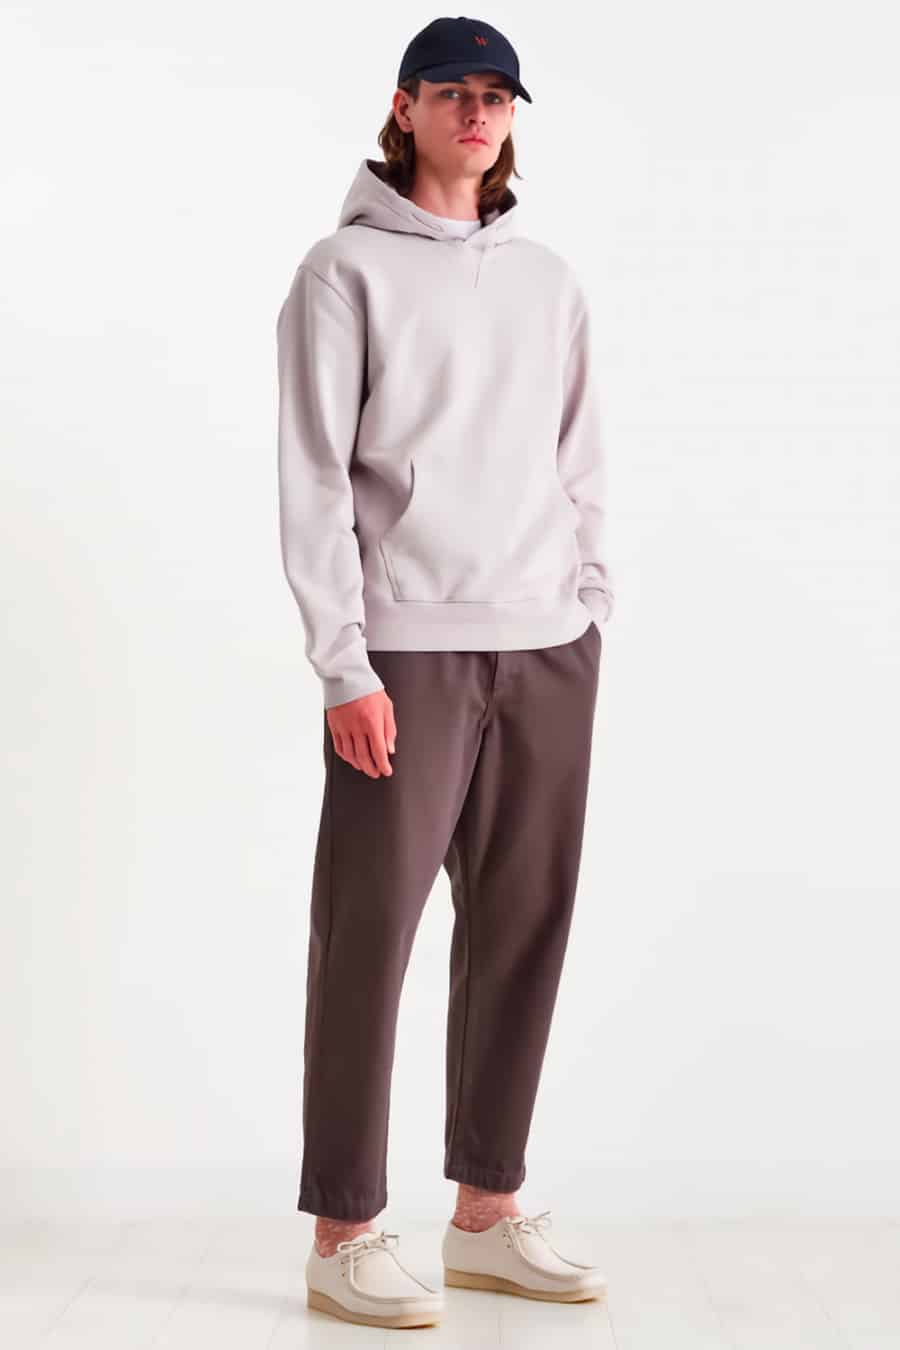 Men's grey chinos, grey hoodie and white Wallabee shoes outfit